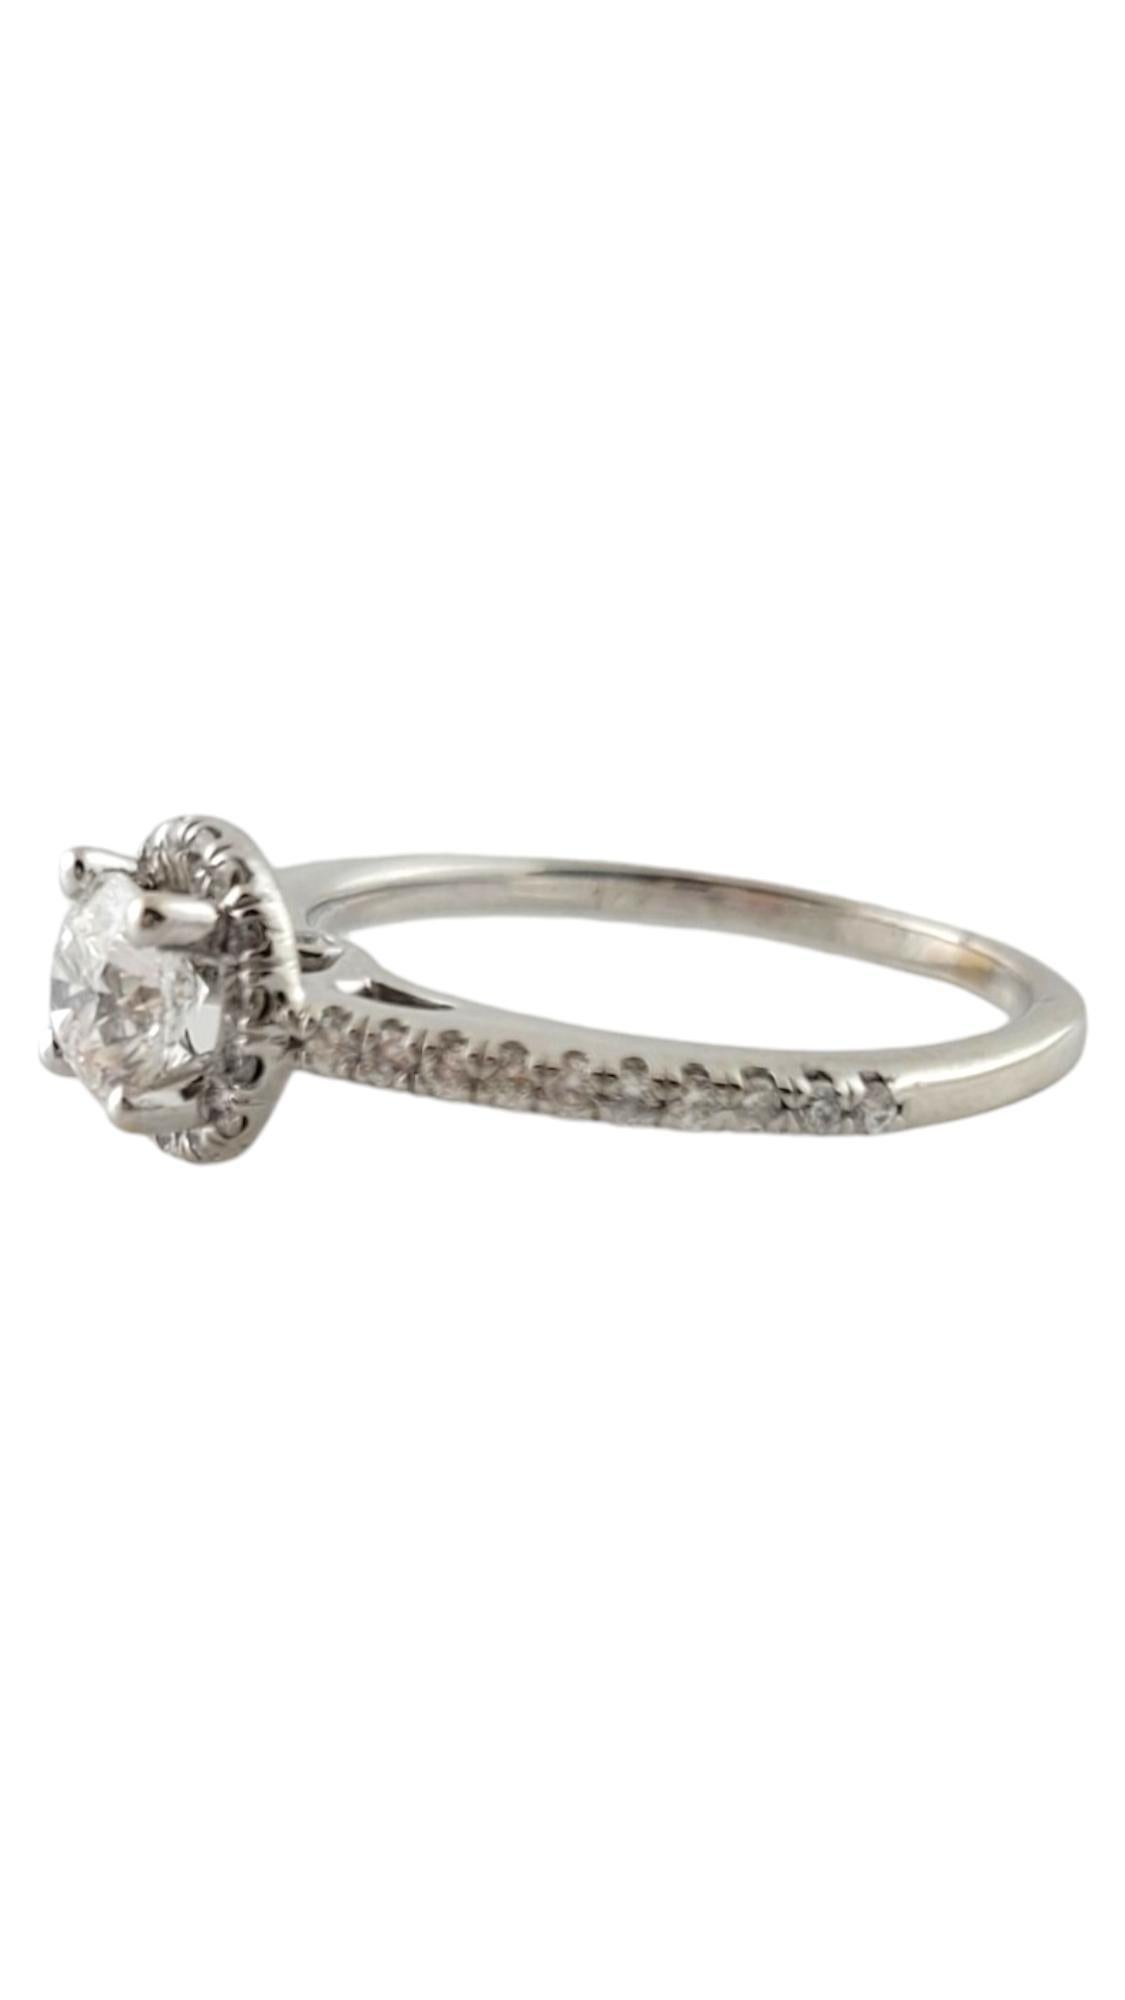 This sparkling 14K white gold ring features one round brilliant cut diamond in its center accented with 38 round brilliant cut diamonds set in the halo and band.

  Width:  7 mm.  Shank:  1 mm.

Center diamond weight:  .52 ct.

Accent diamond total